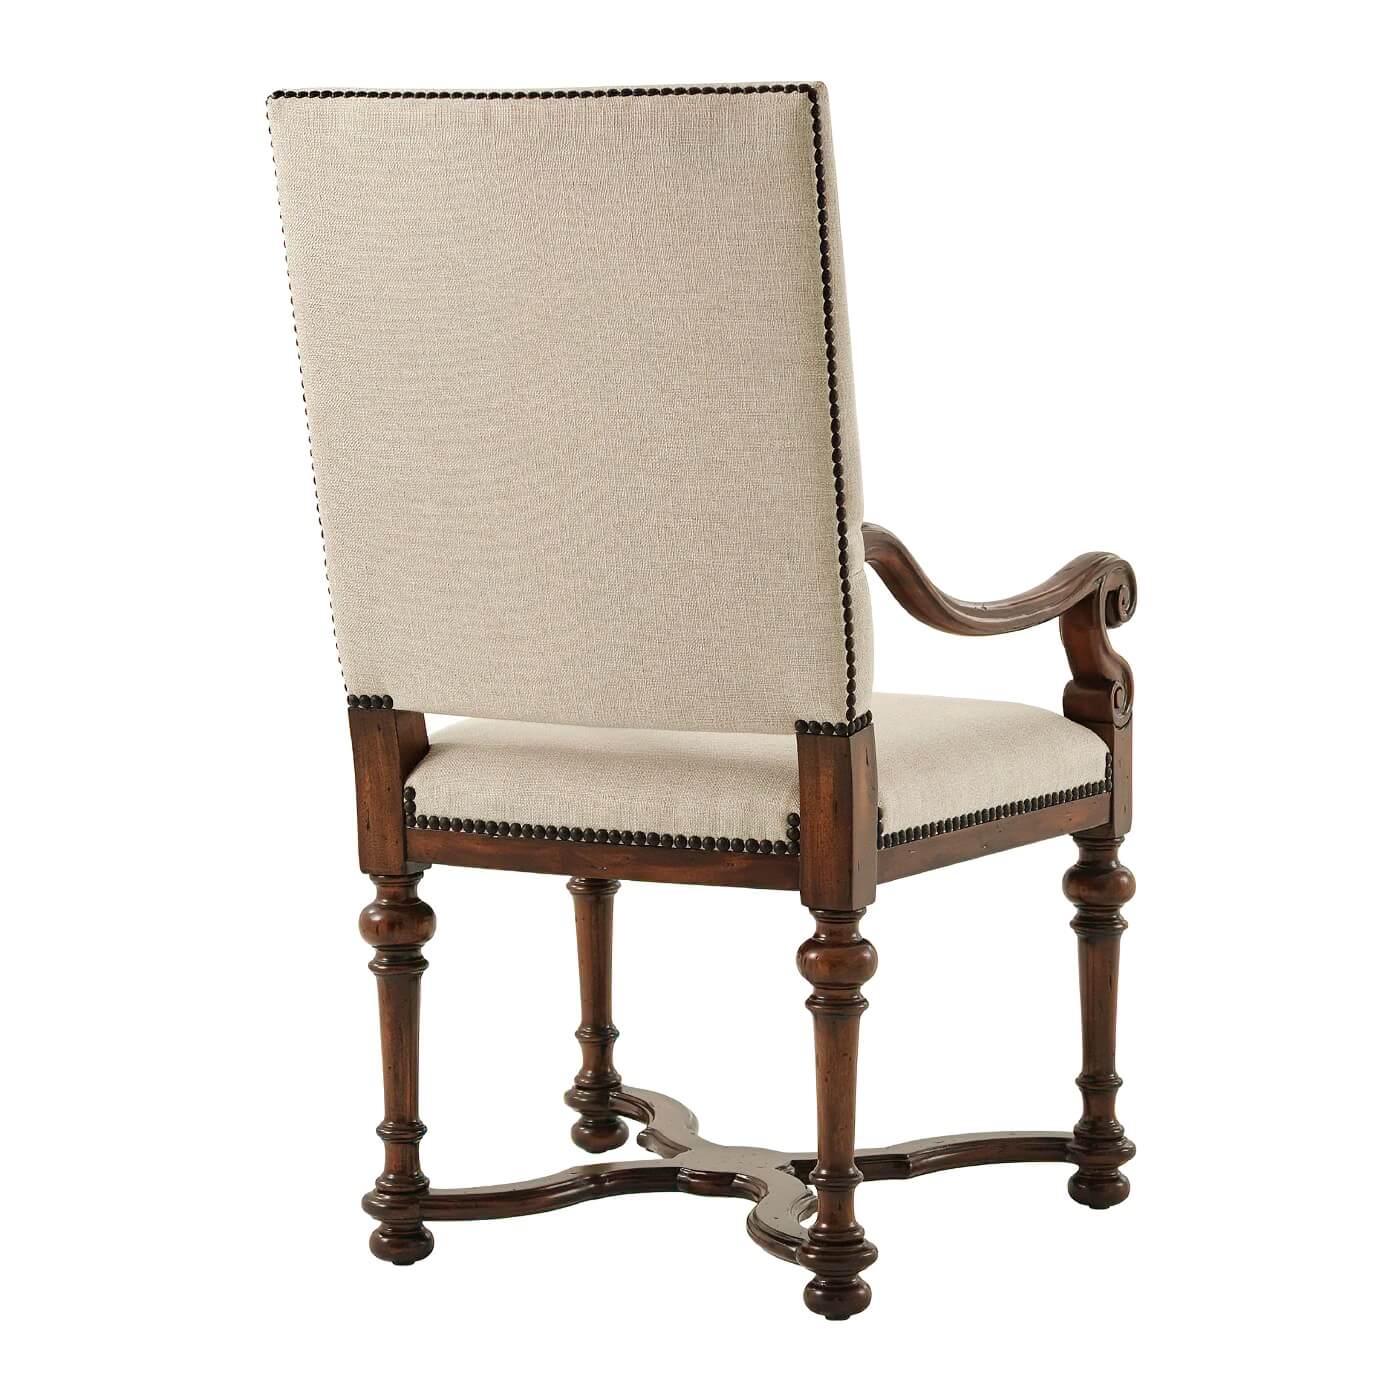 William and Mary Upholstered Armchair - English Georgian America